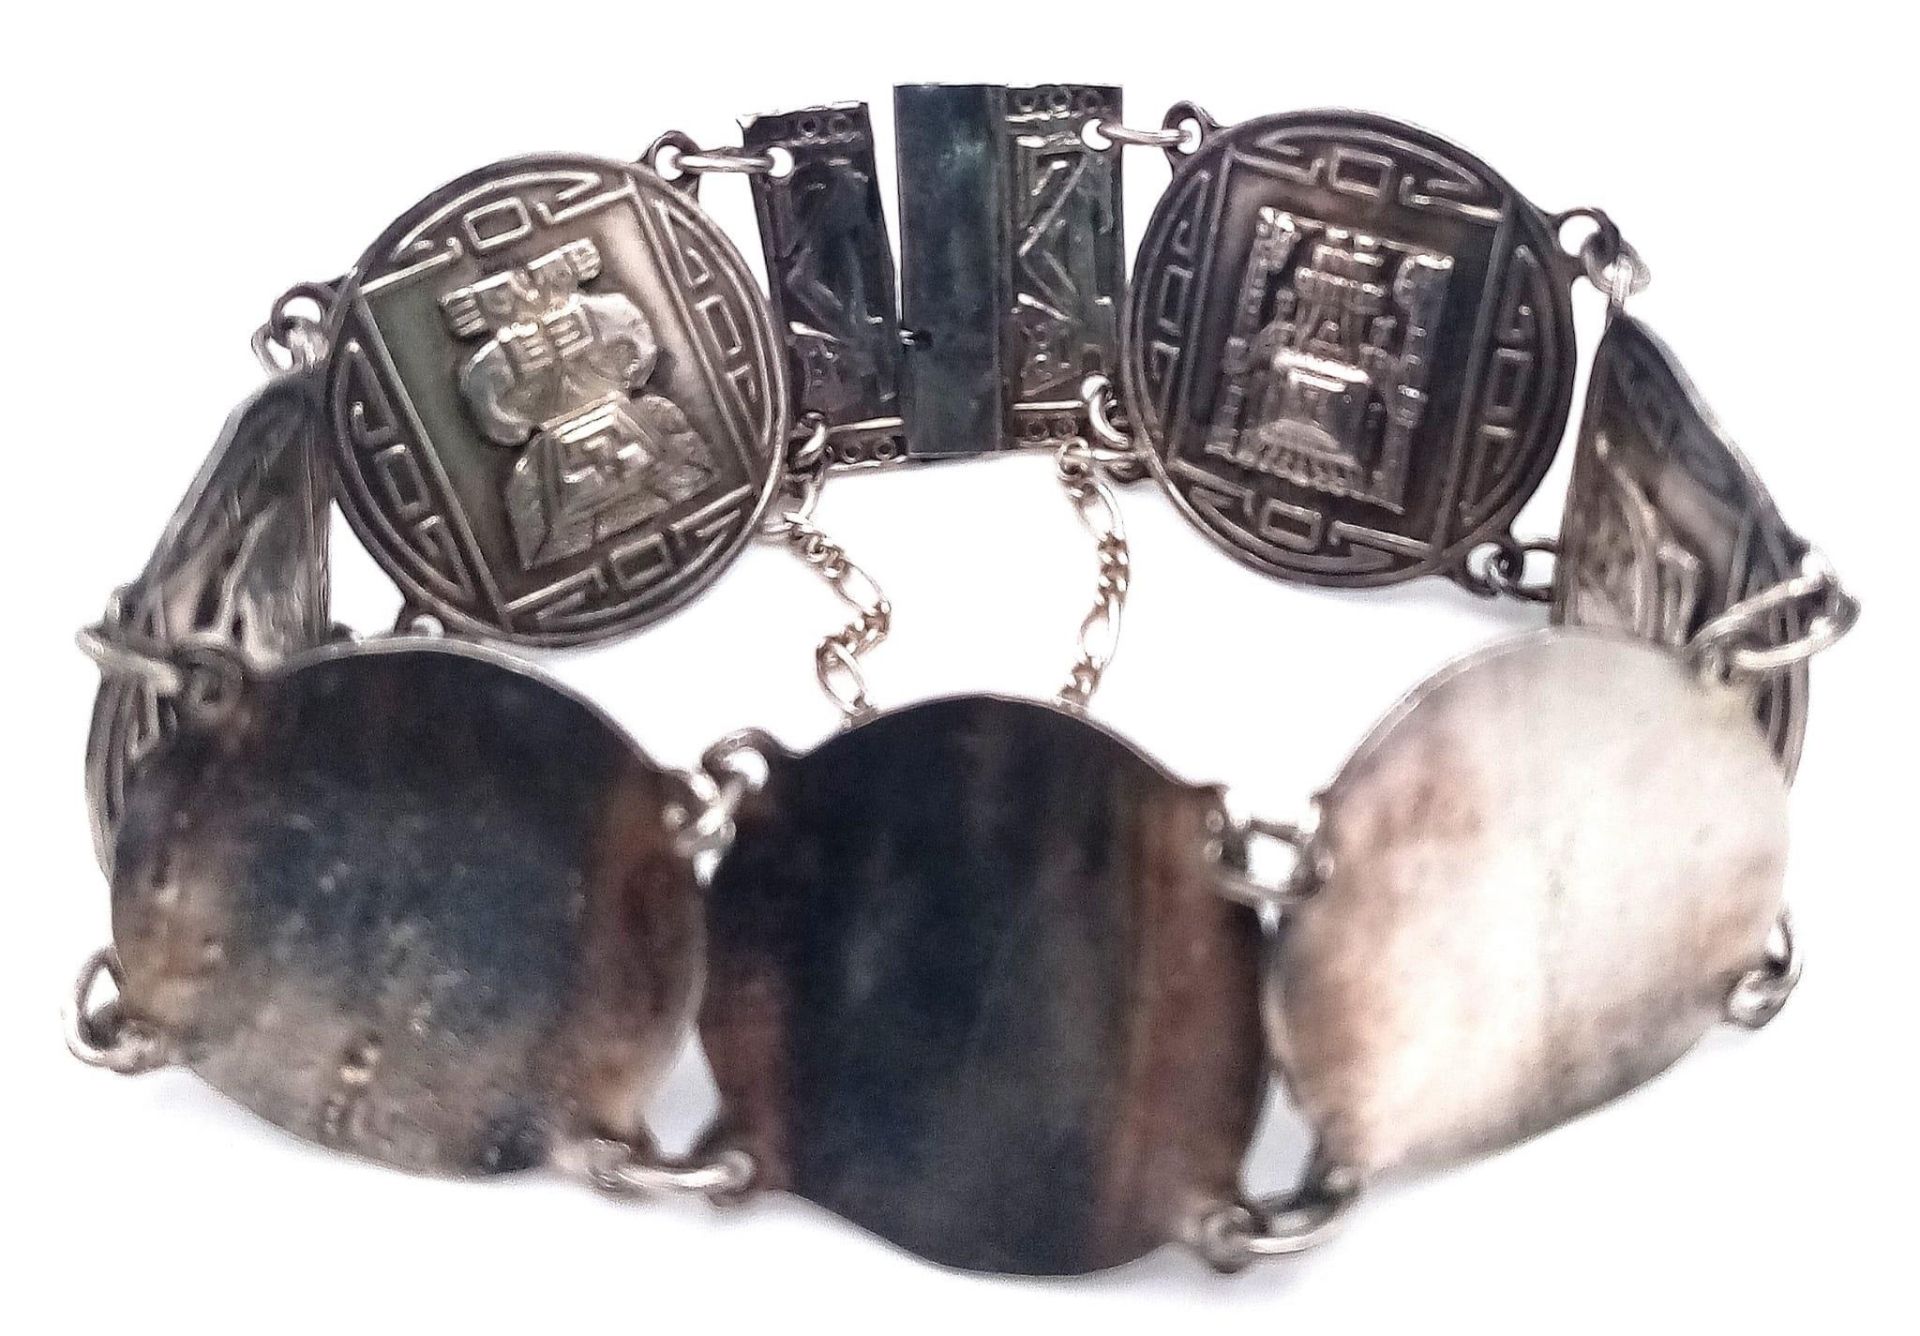 A Silver Fancy Aztec Bracelet with Safety Chain. 19cm length, 26.2g total weight. Ref: 8065 - Image 3 of 4